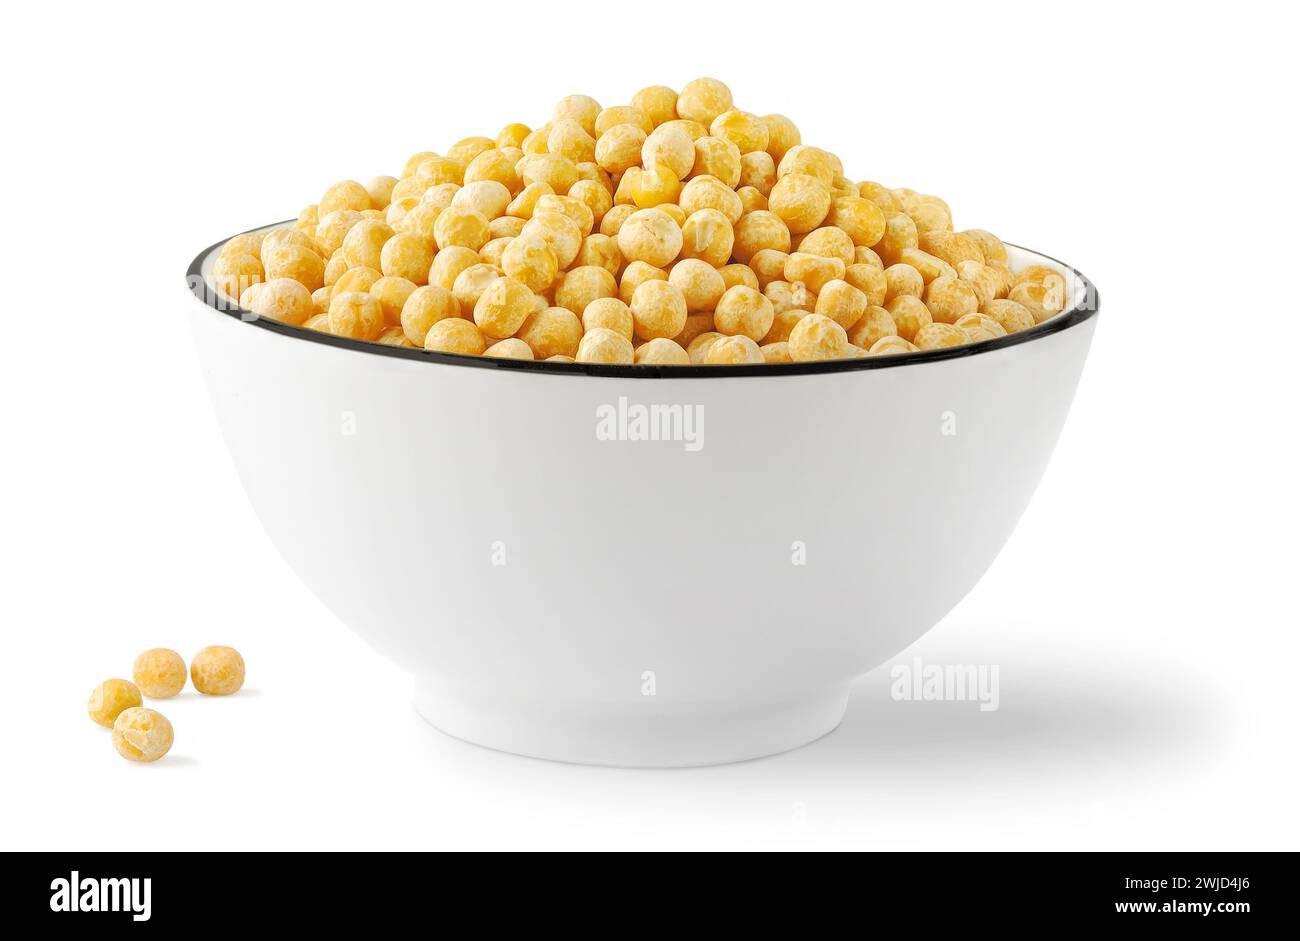 Bowl of raw yellow chickpeas isolated on white background Stock Photo